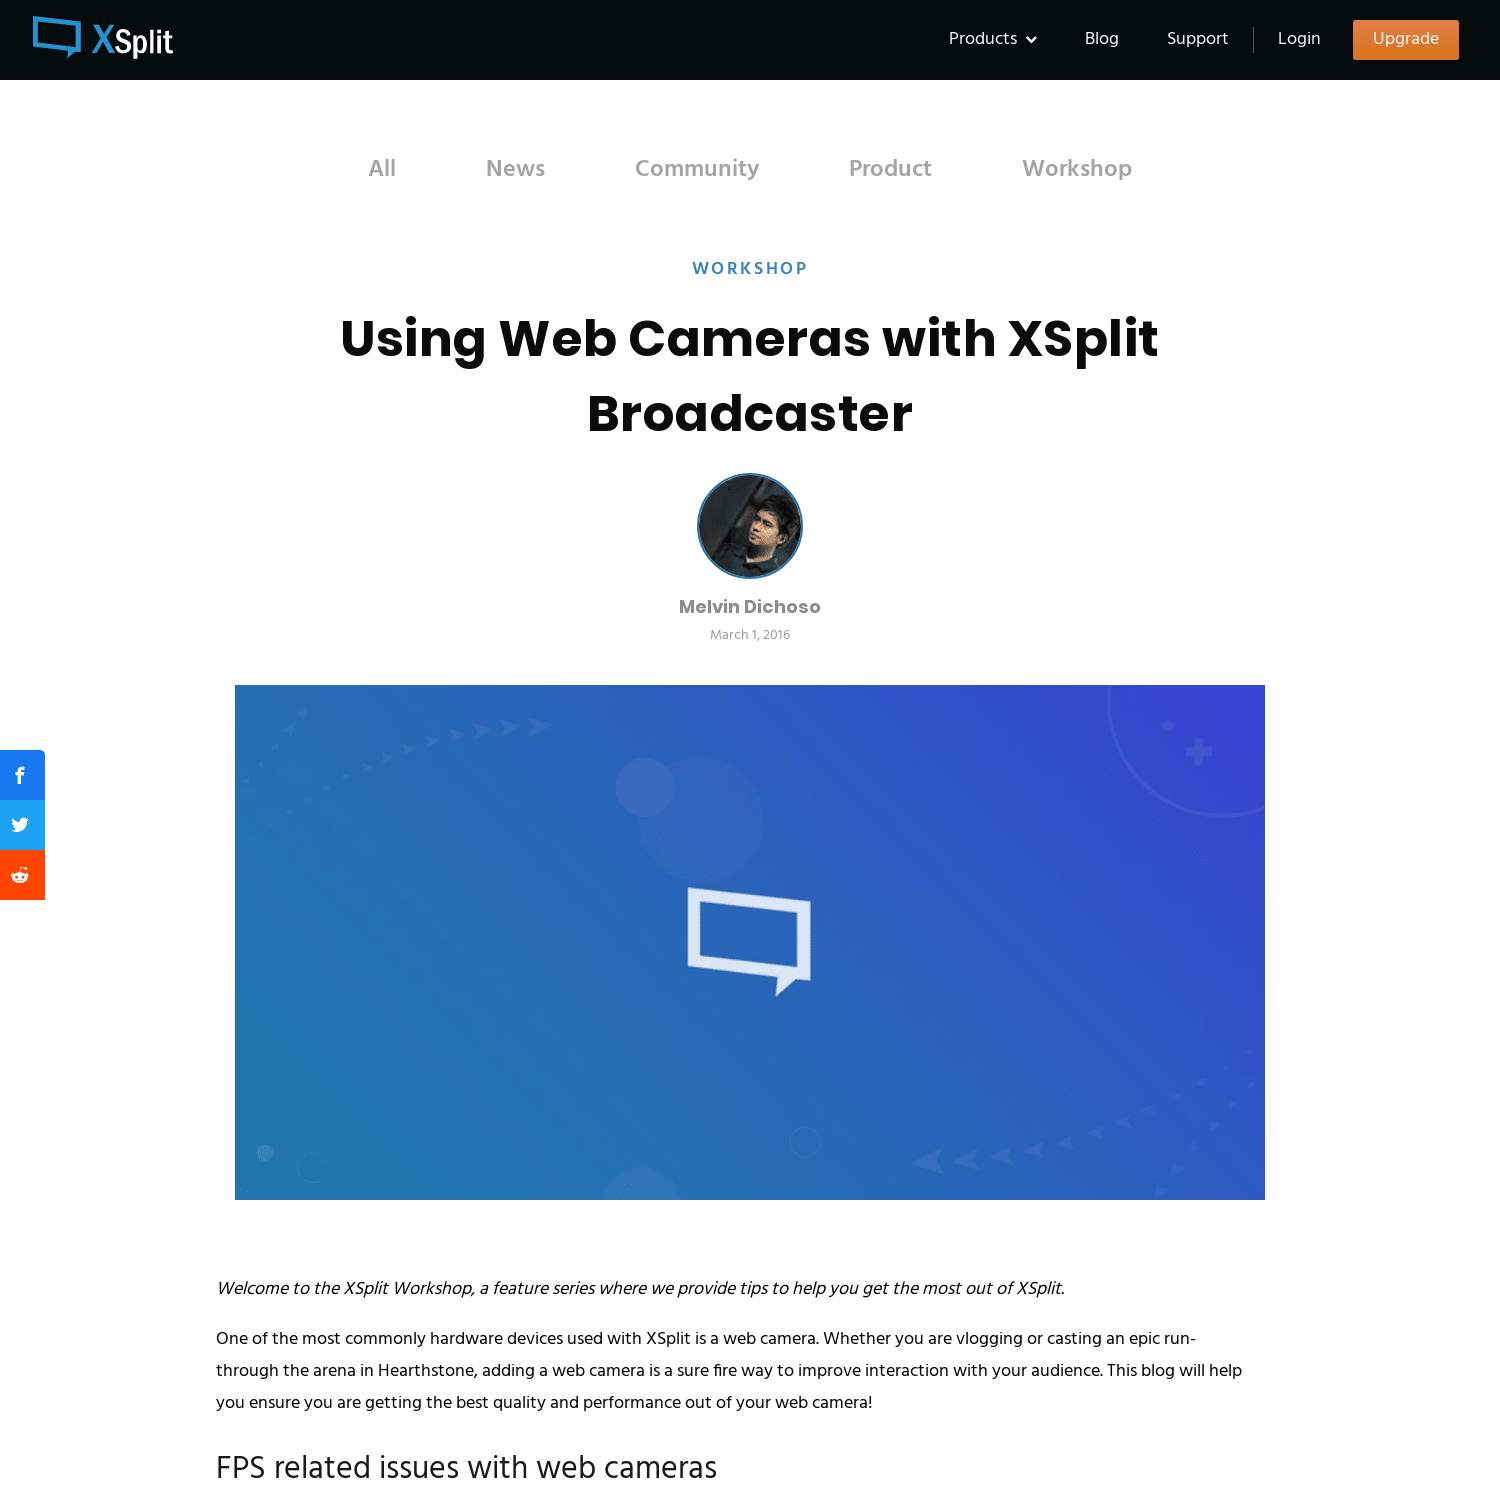 Using Web Cameras with XSplit Broadcaster